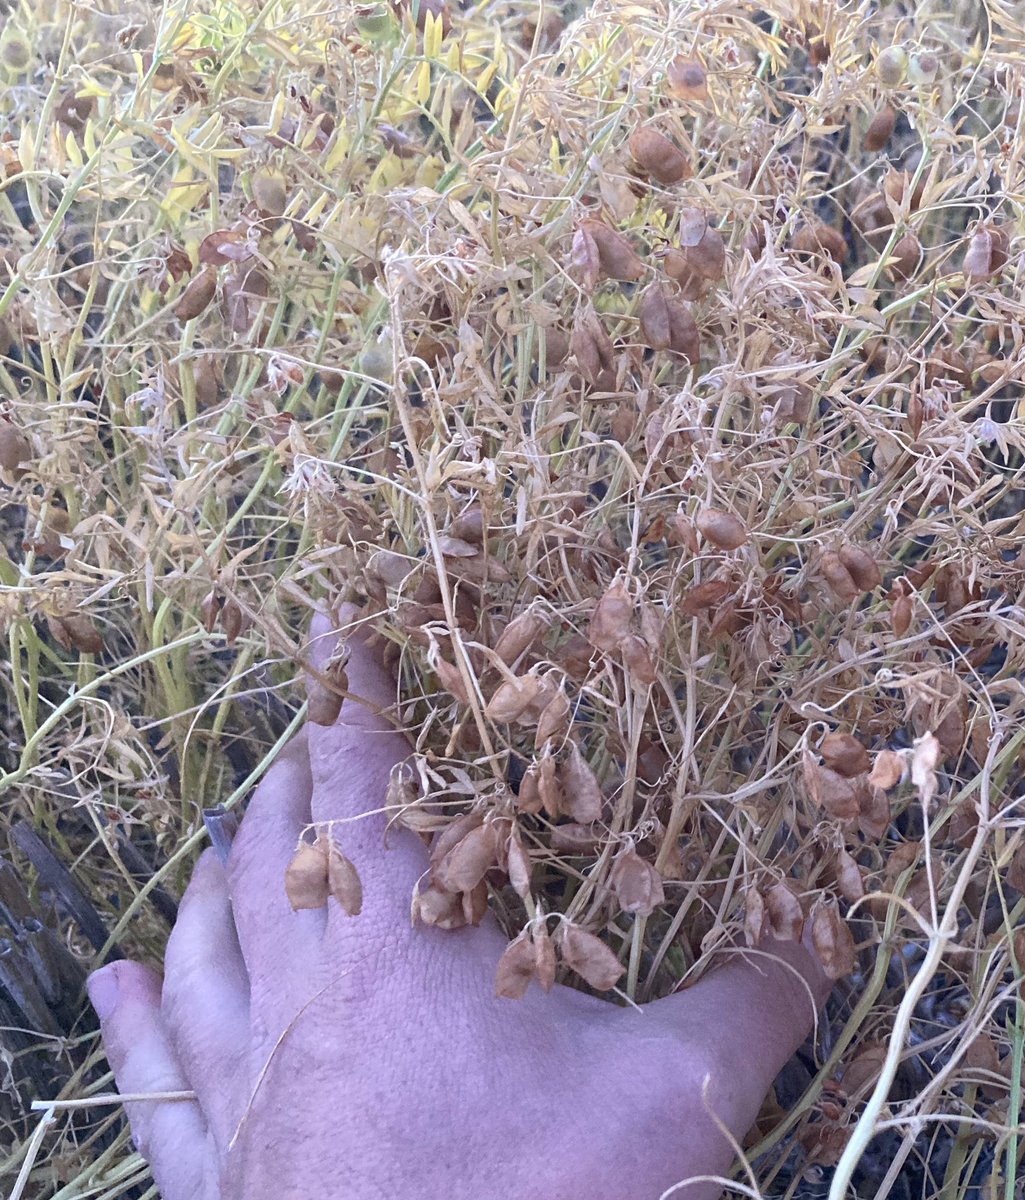 Late Oct frost knocked some lentils around. Disappointing to get hit this late, hopefully still end up with a reasonable average.